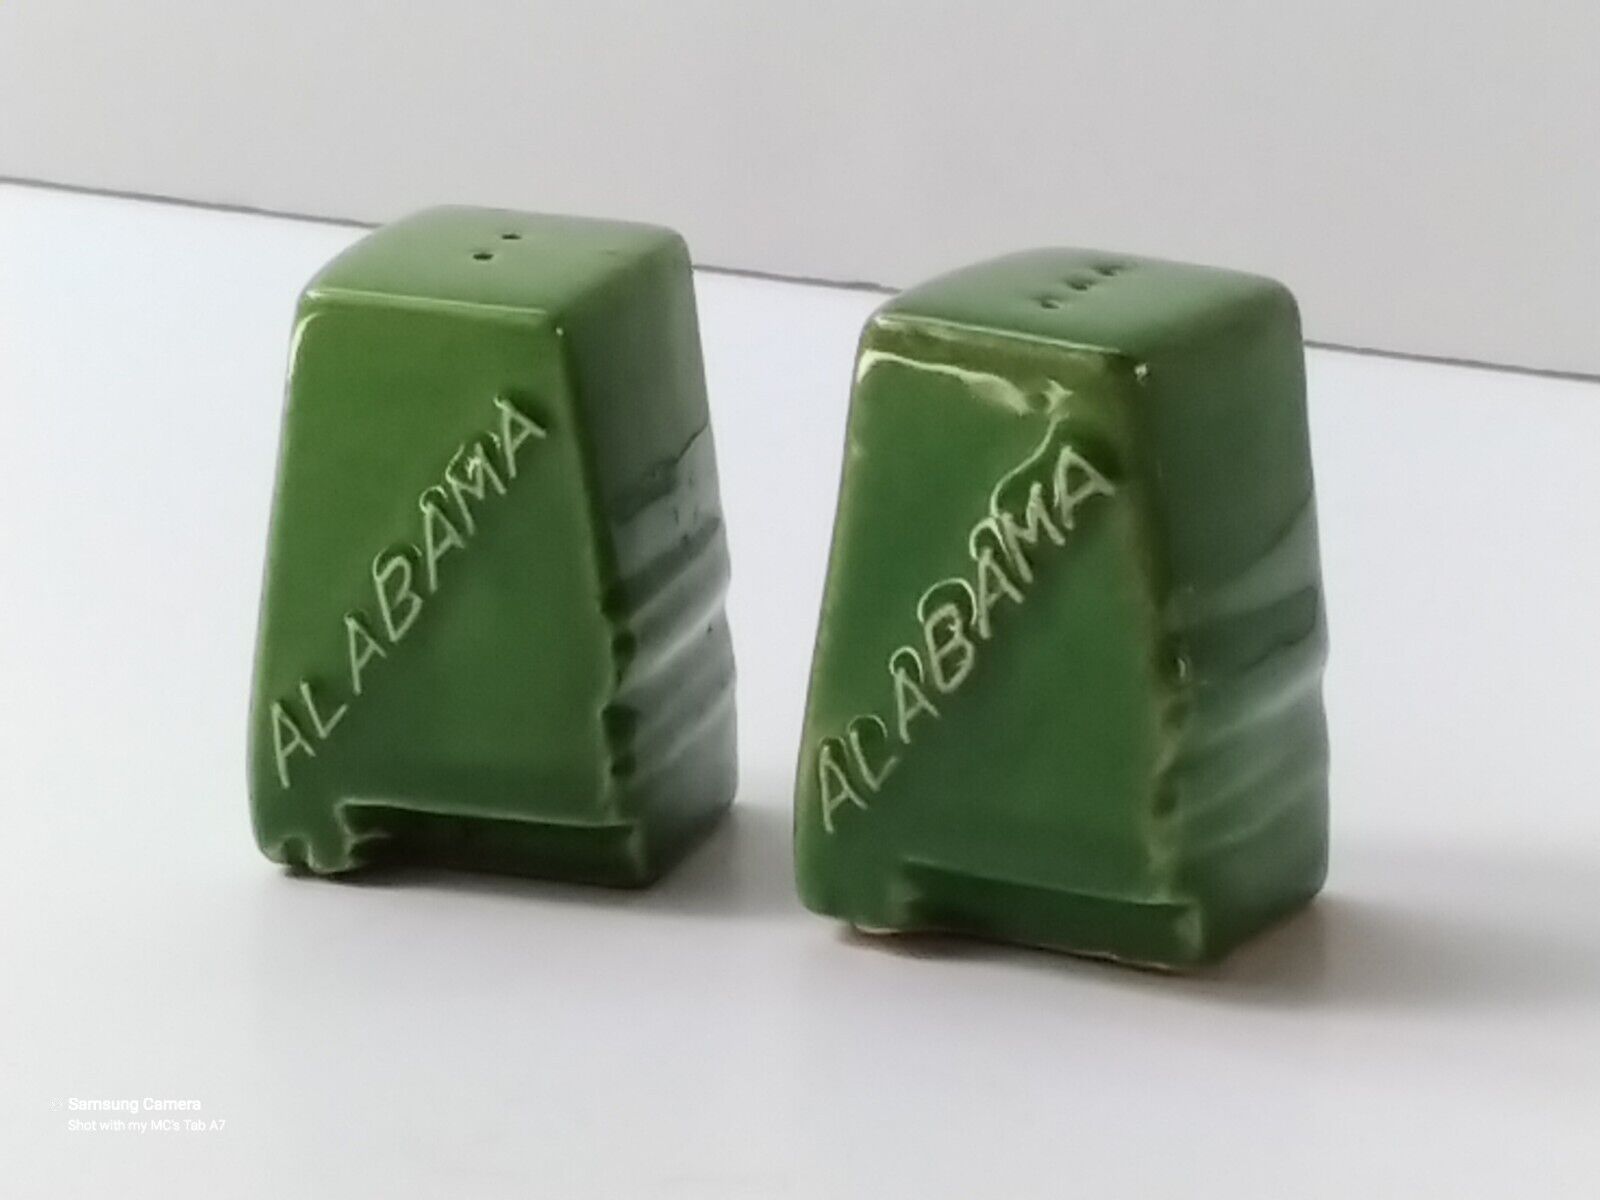 Milford Pottery Alabama Salt And Pepper Shakers